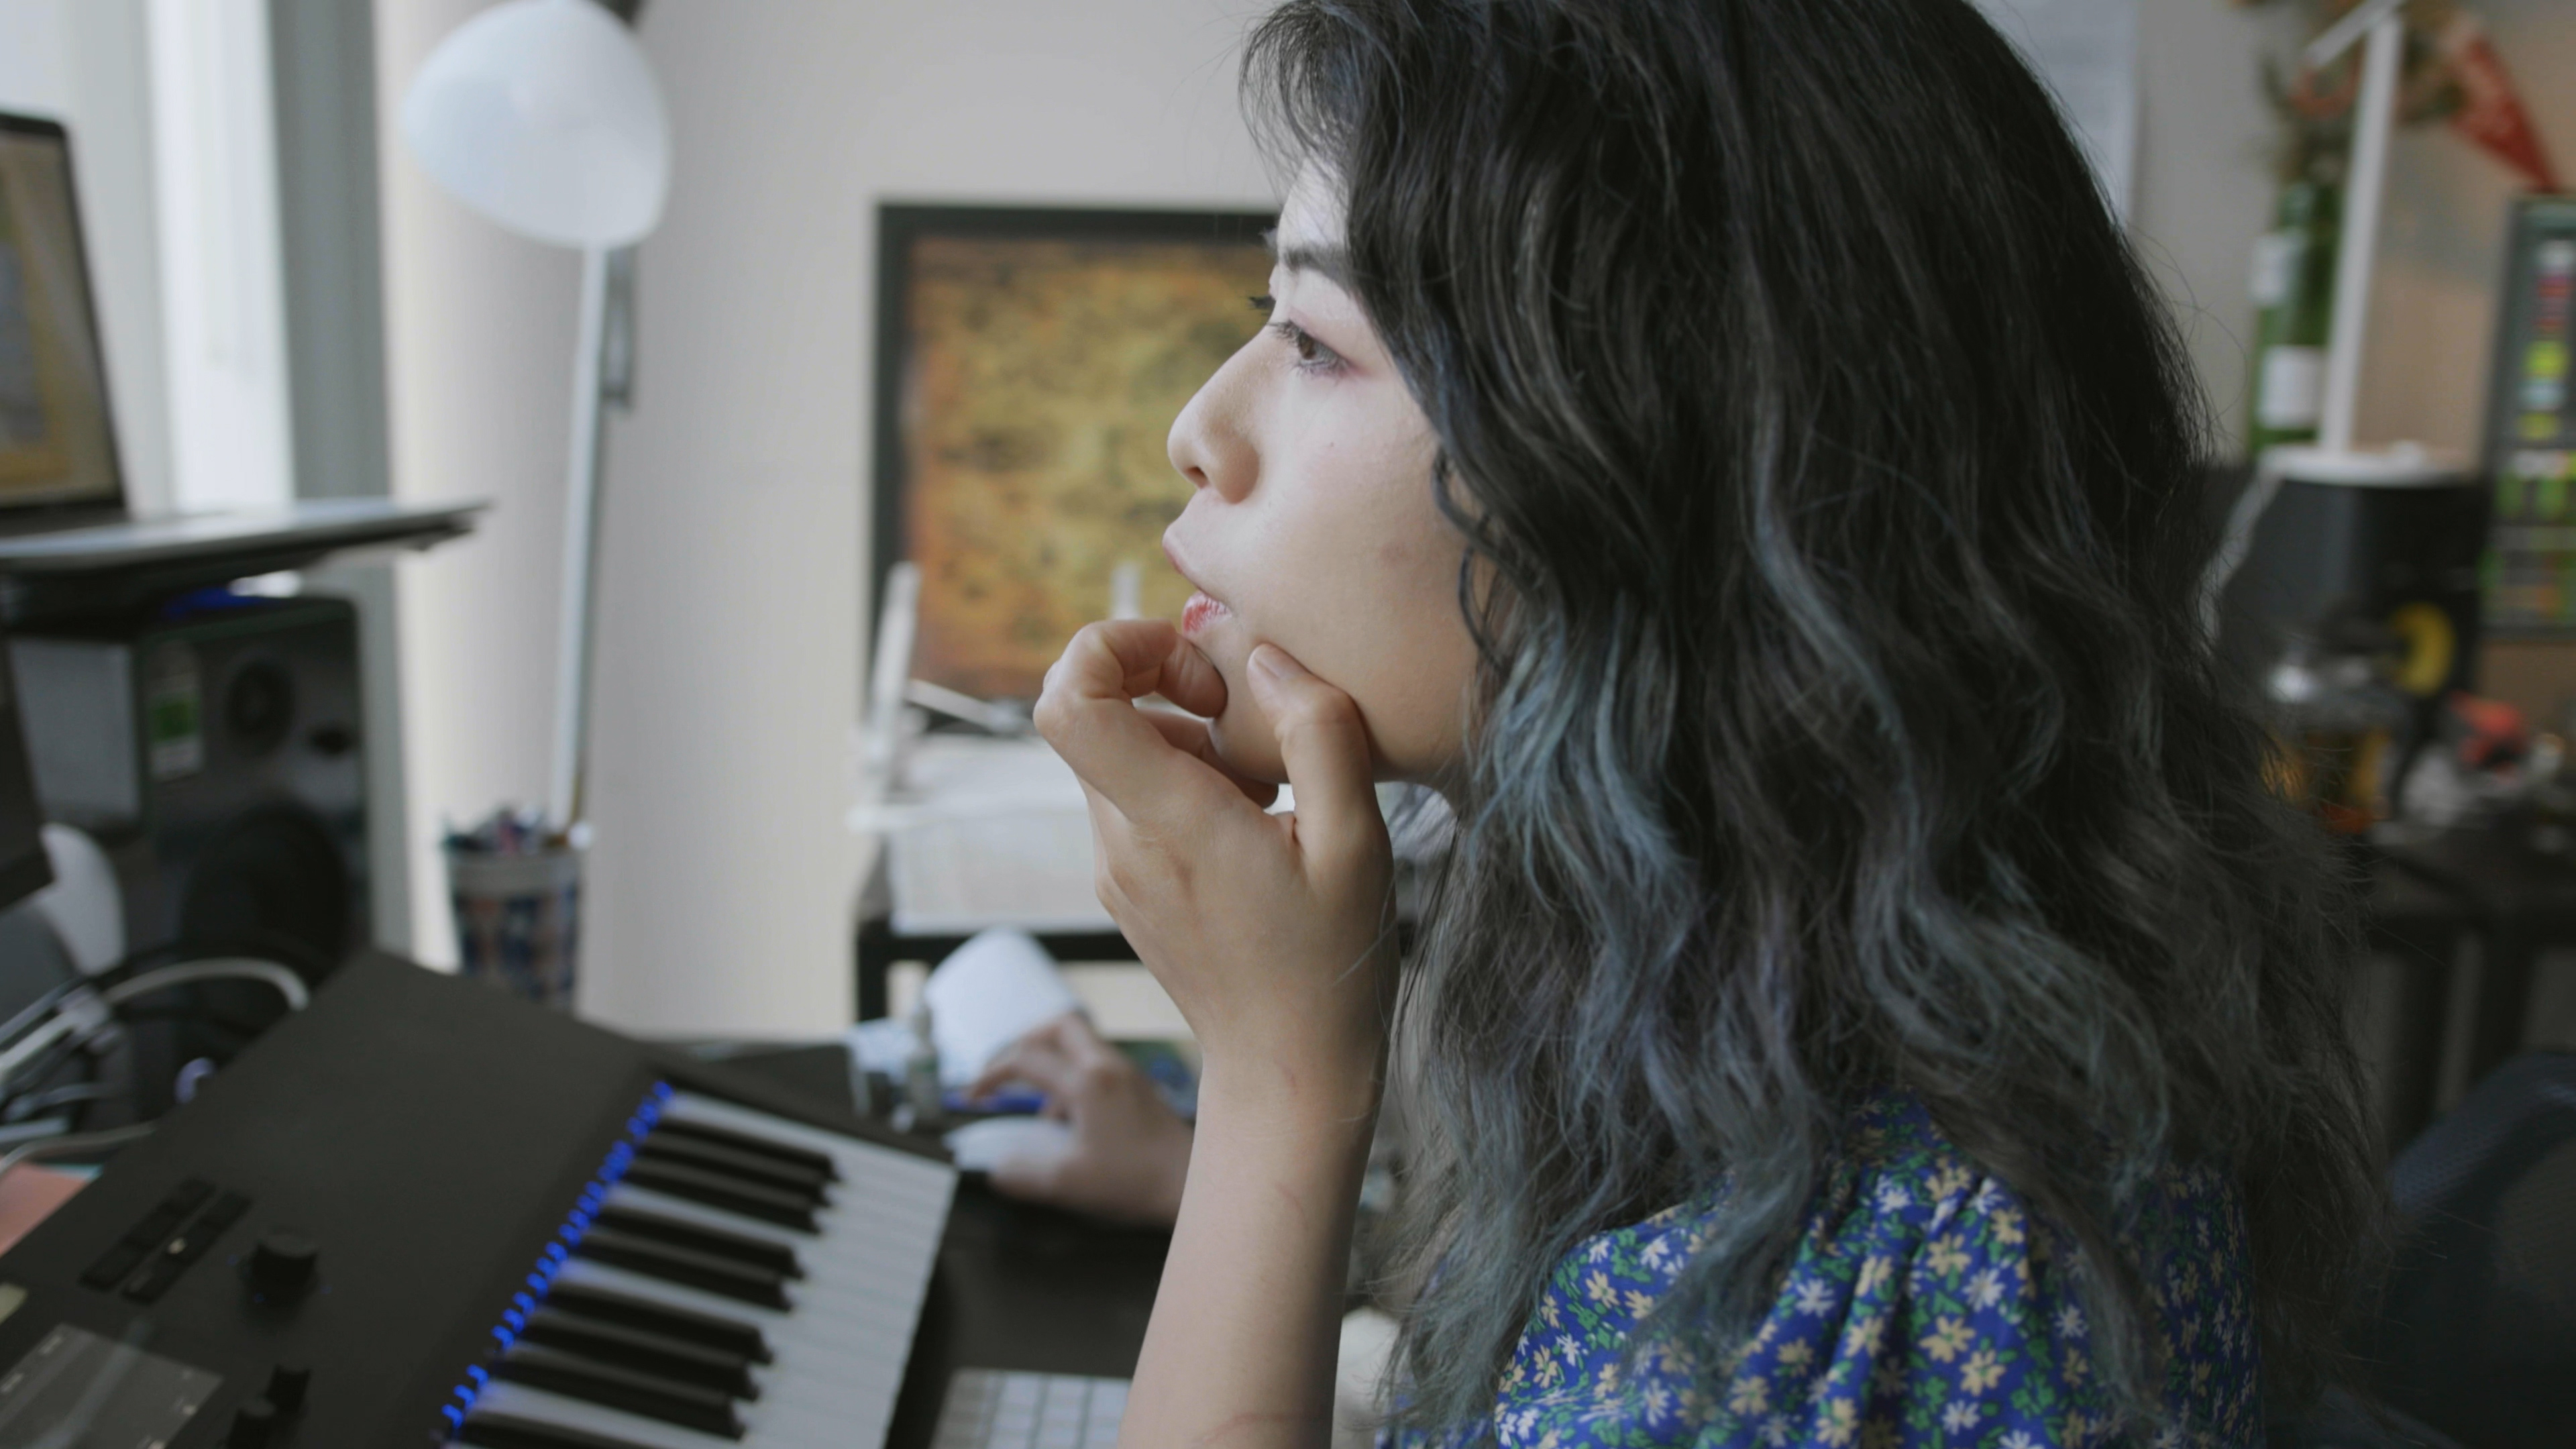 Side view of person sitting at a desk looking at a computer screen with a piano keyboard in front of them.